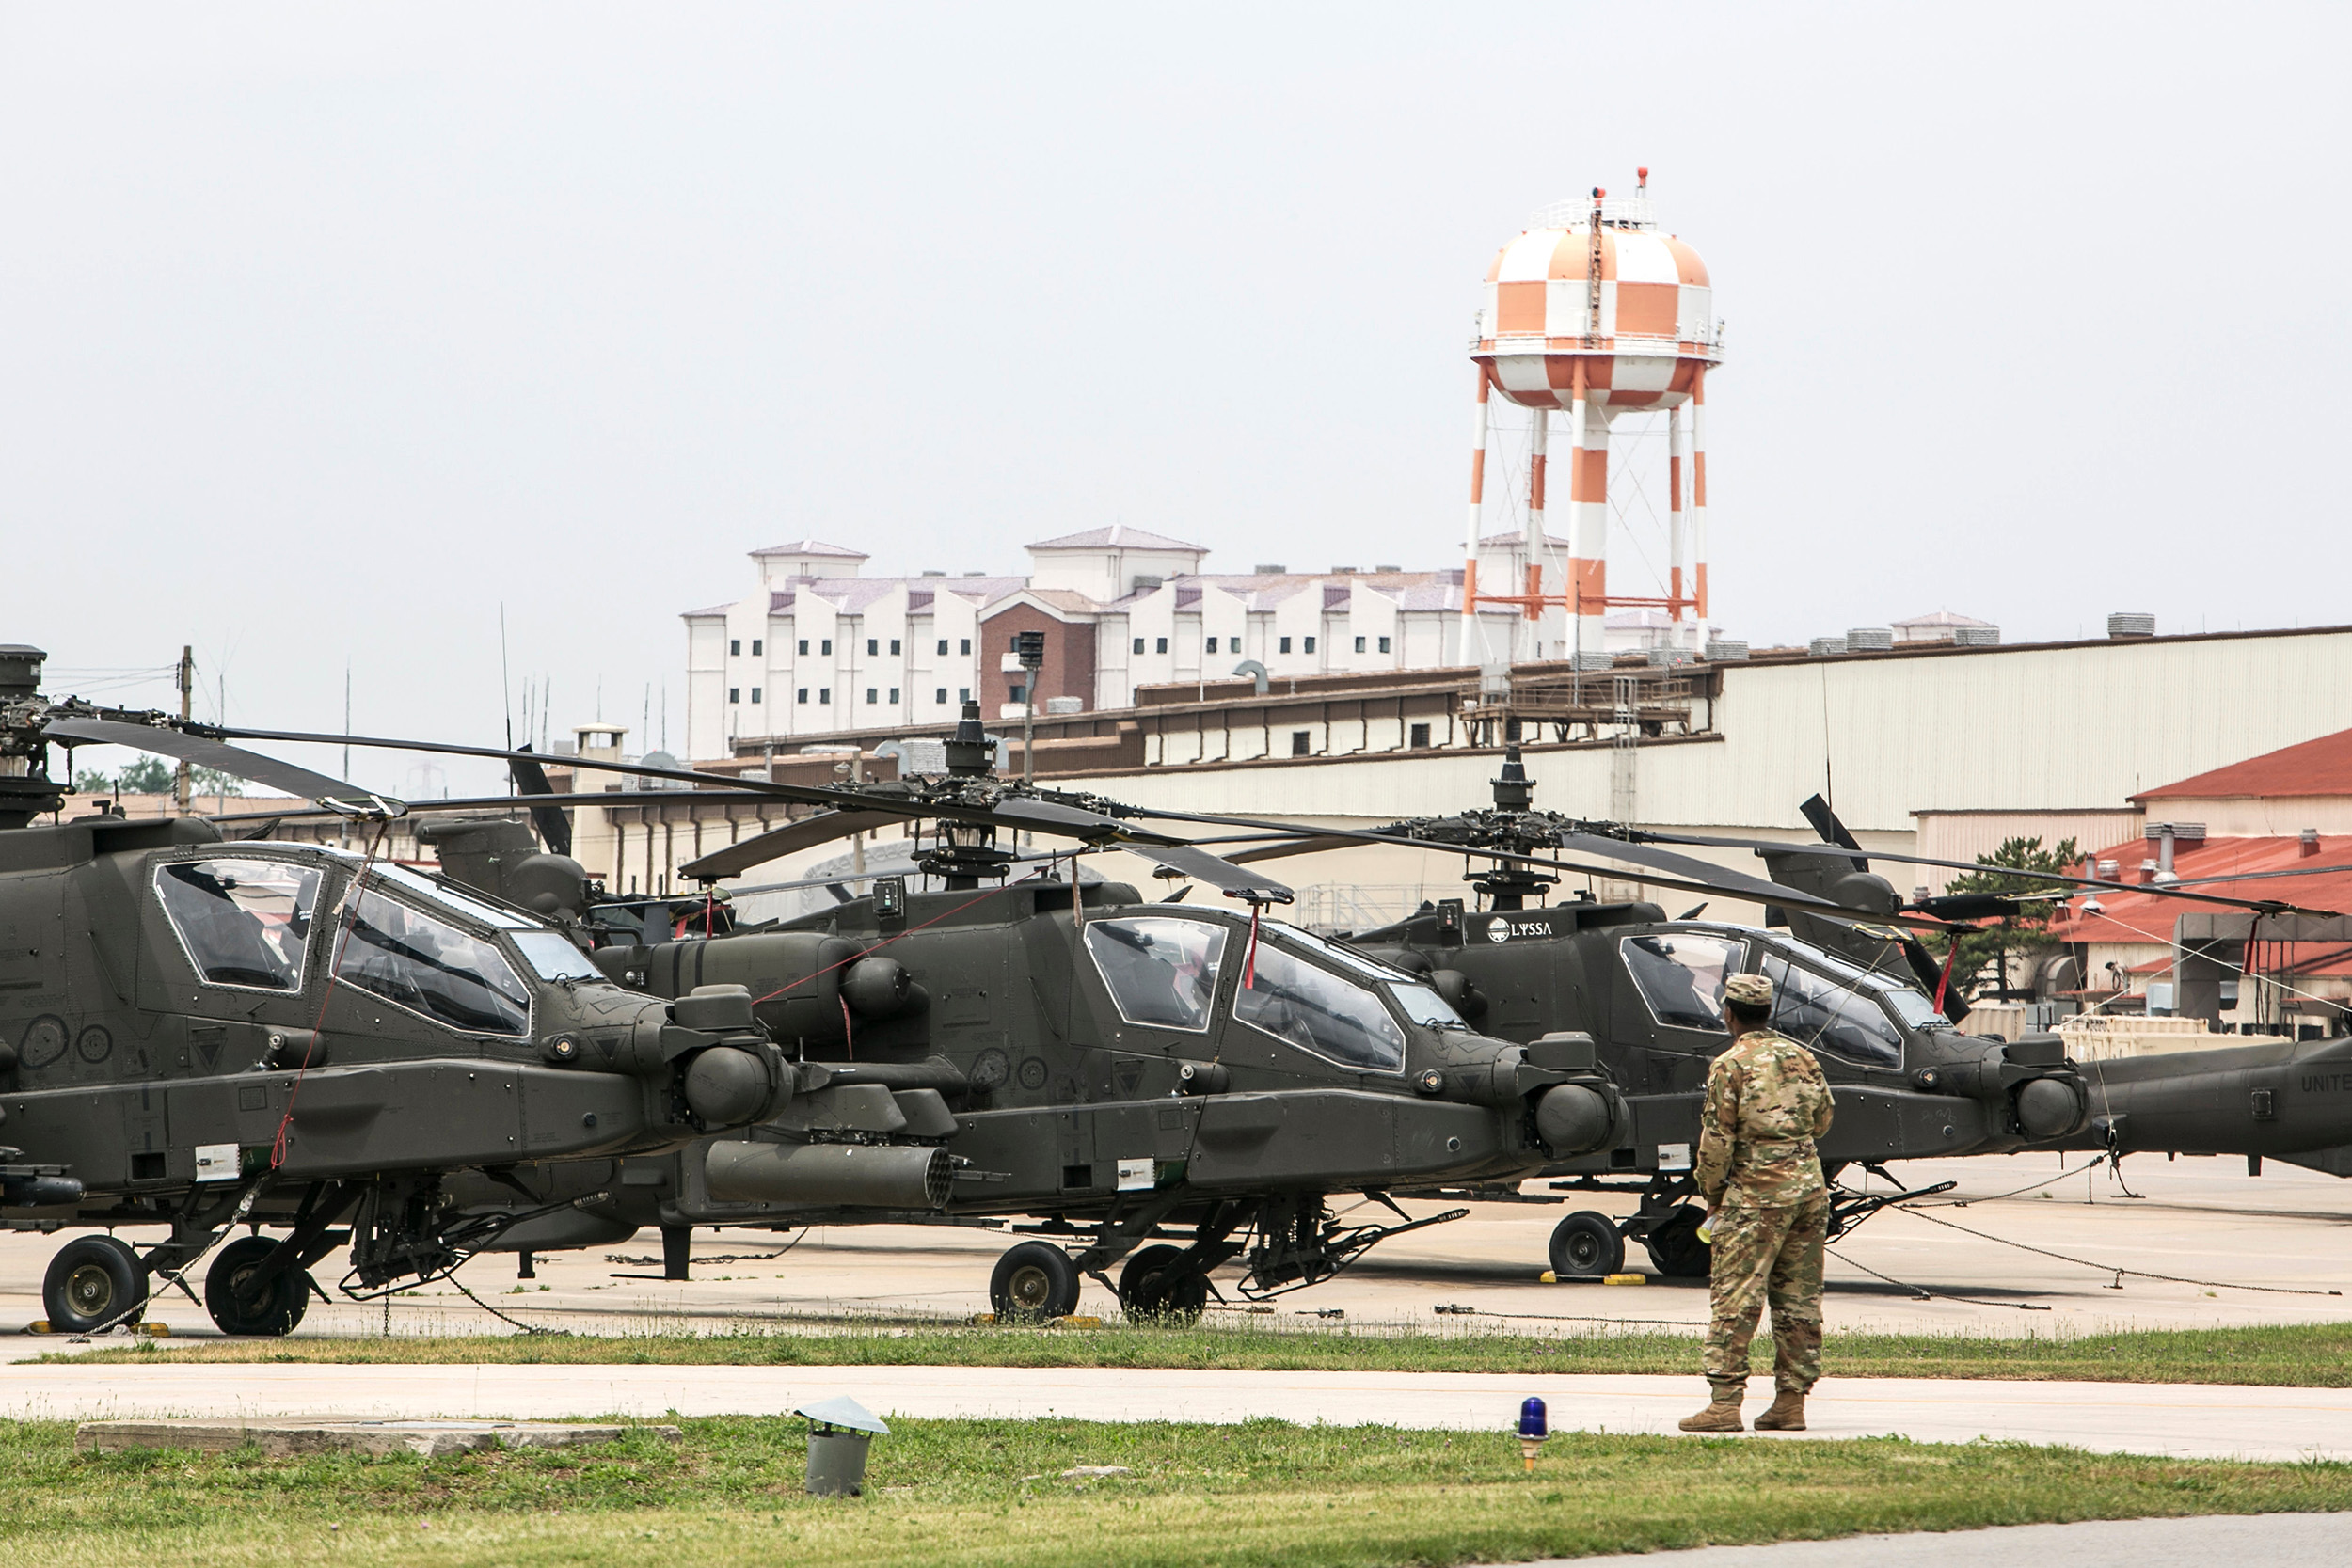 A member of the U.S. Army stands in front of military helicopters at U.S. Army Camp Humphreys  in Pyeongtaek, South Korea, on June 8, 2019. 